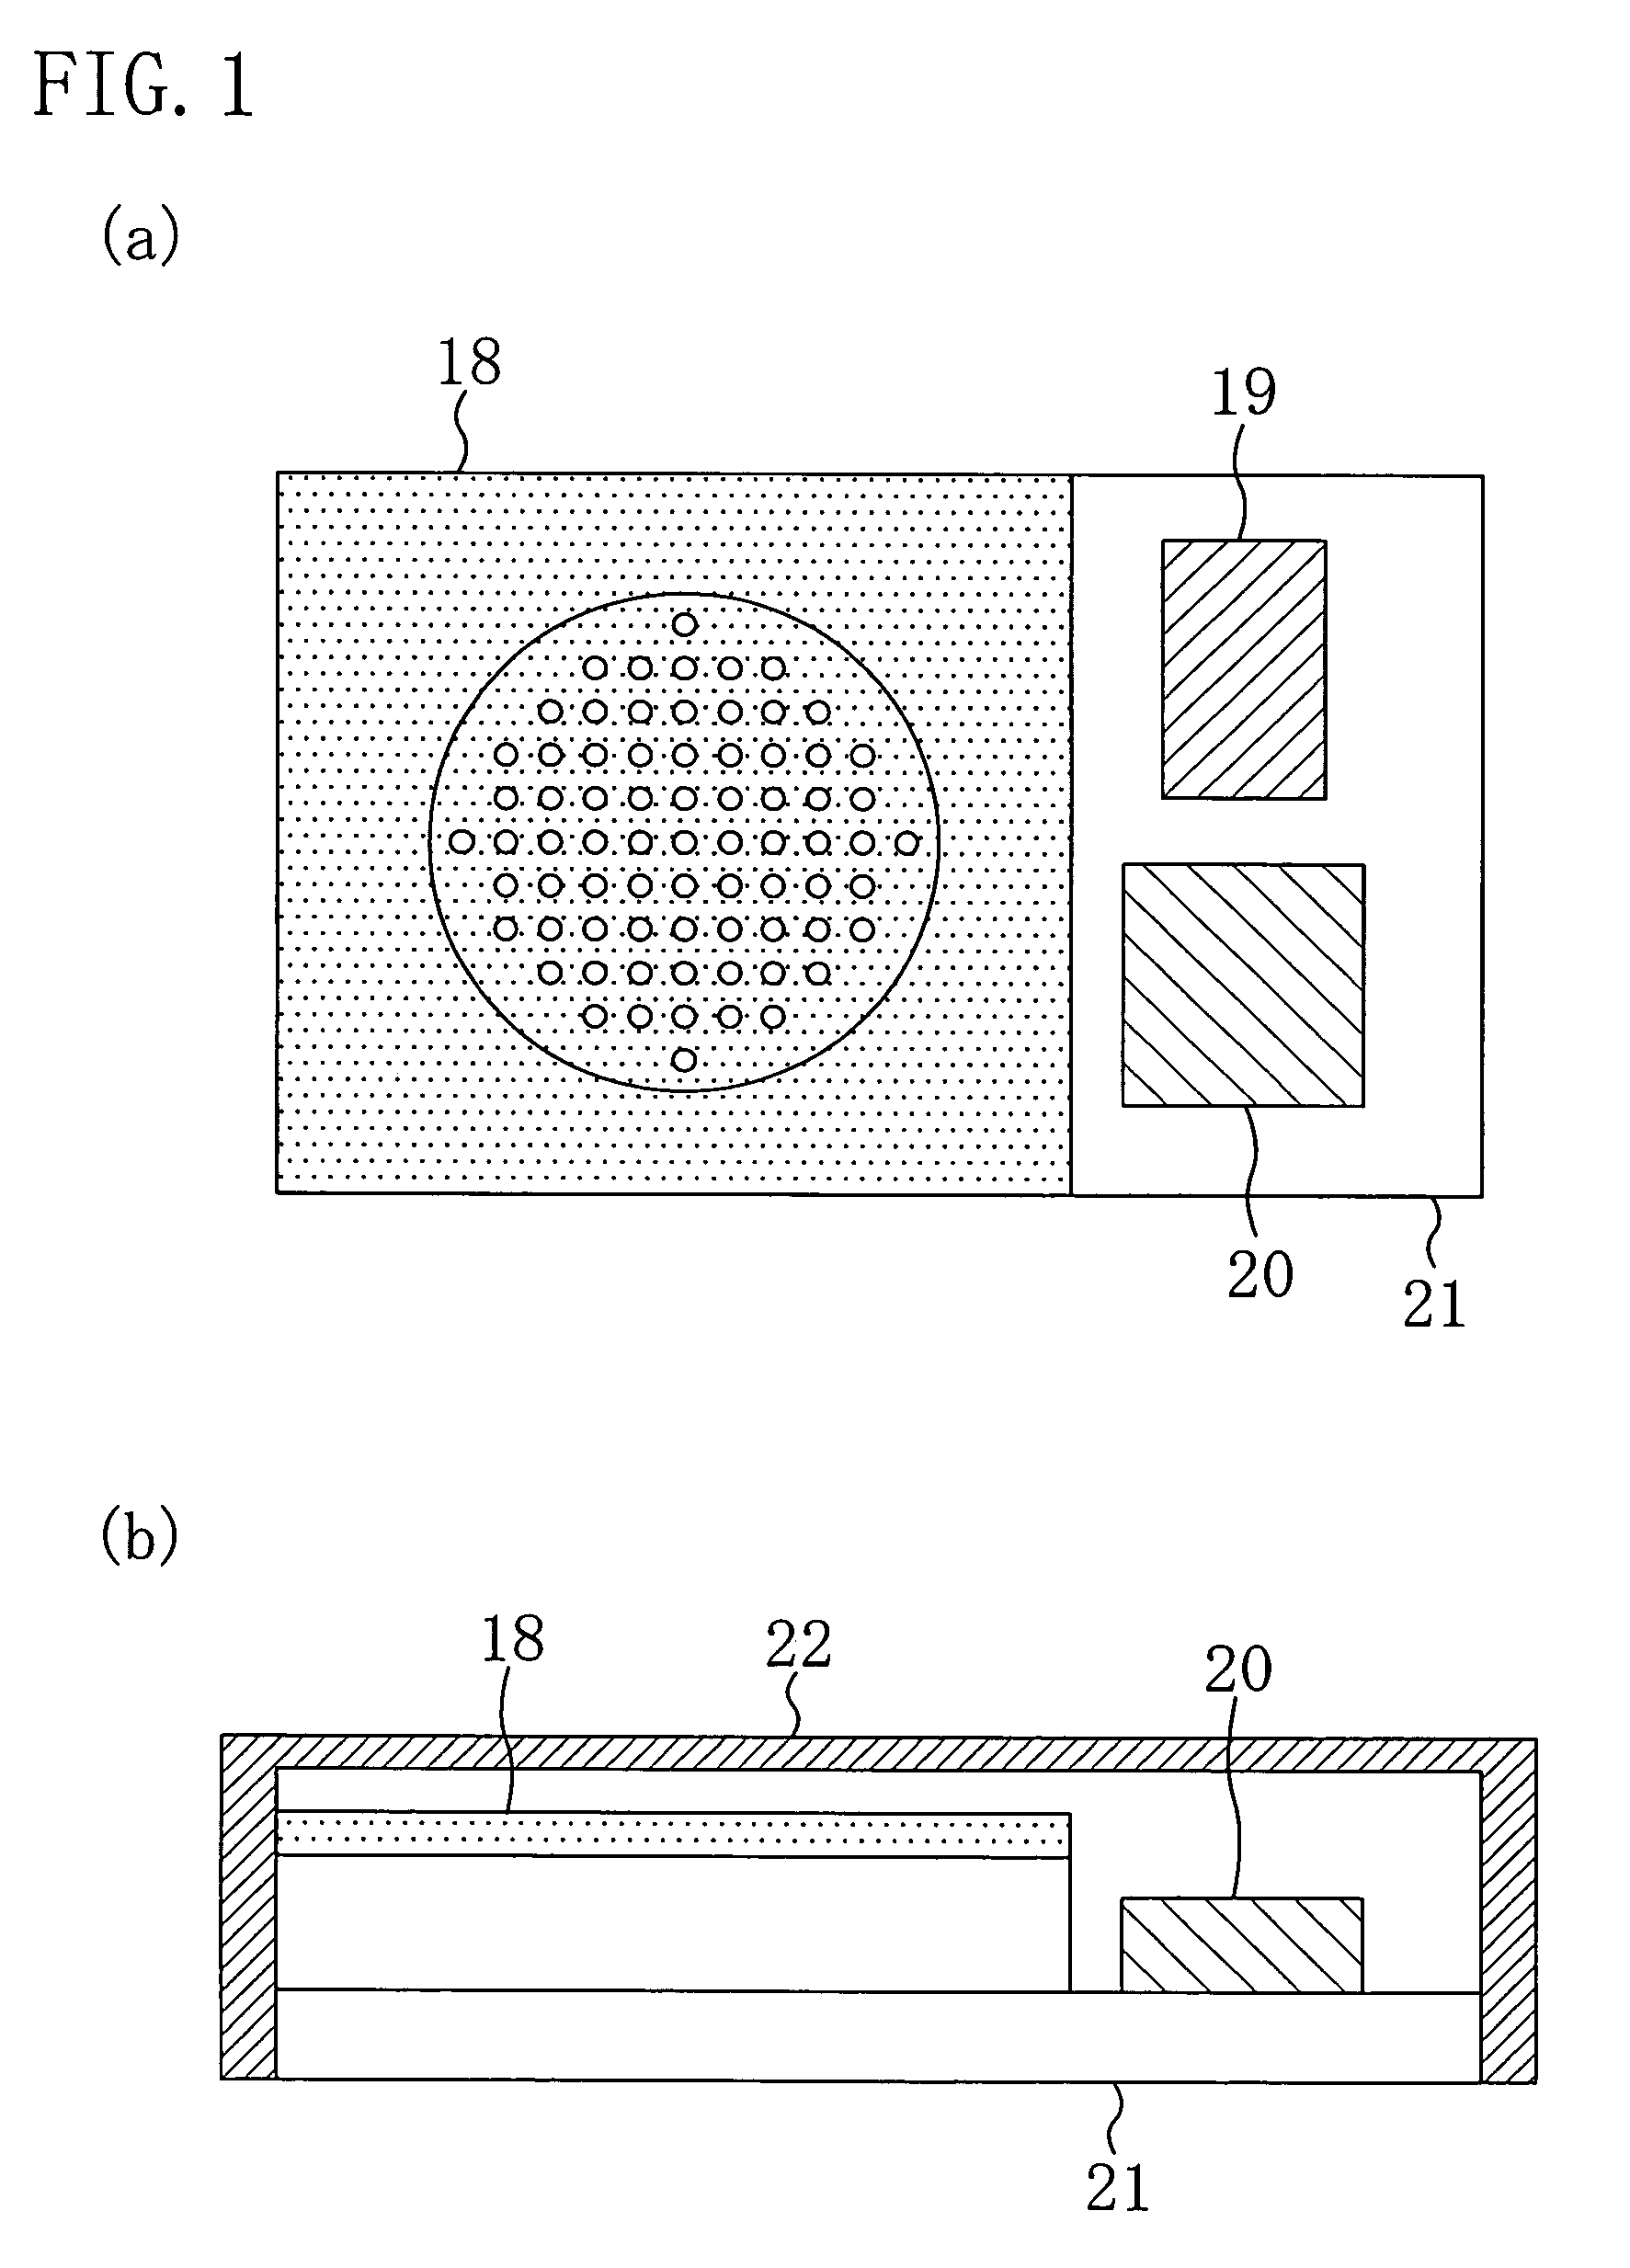 Electret covered with an insulated film and an electret condenser having the electret